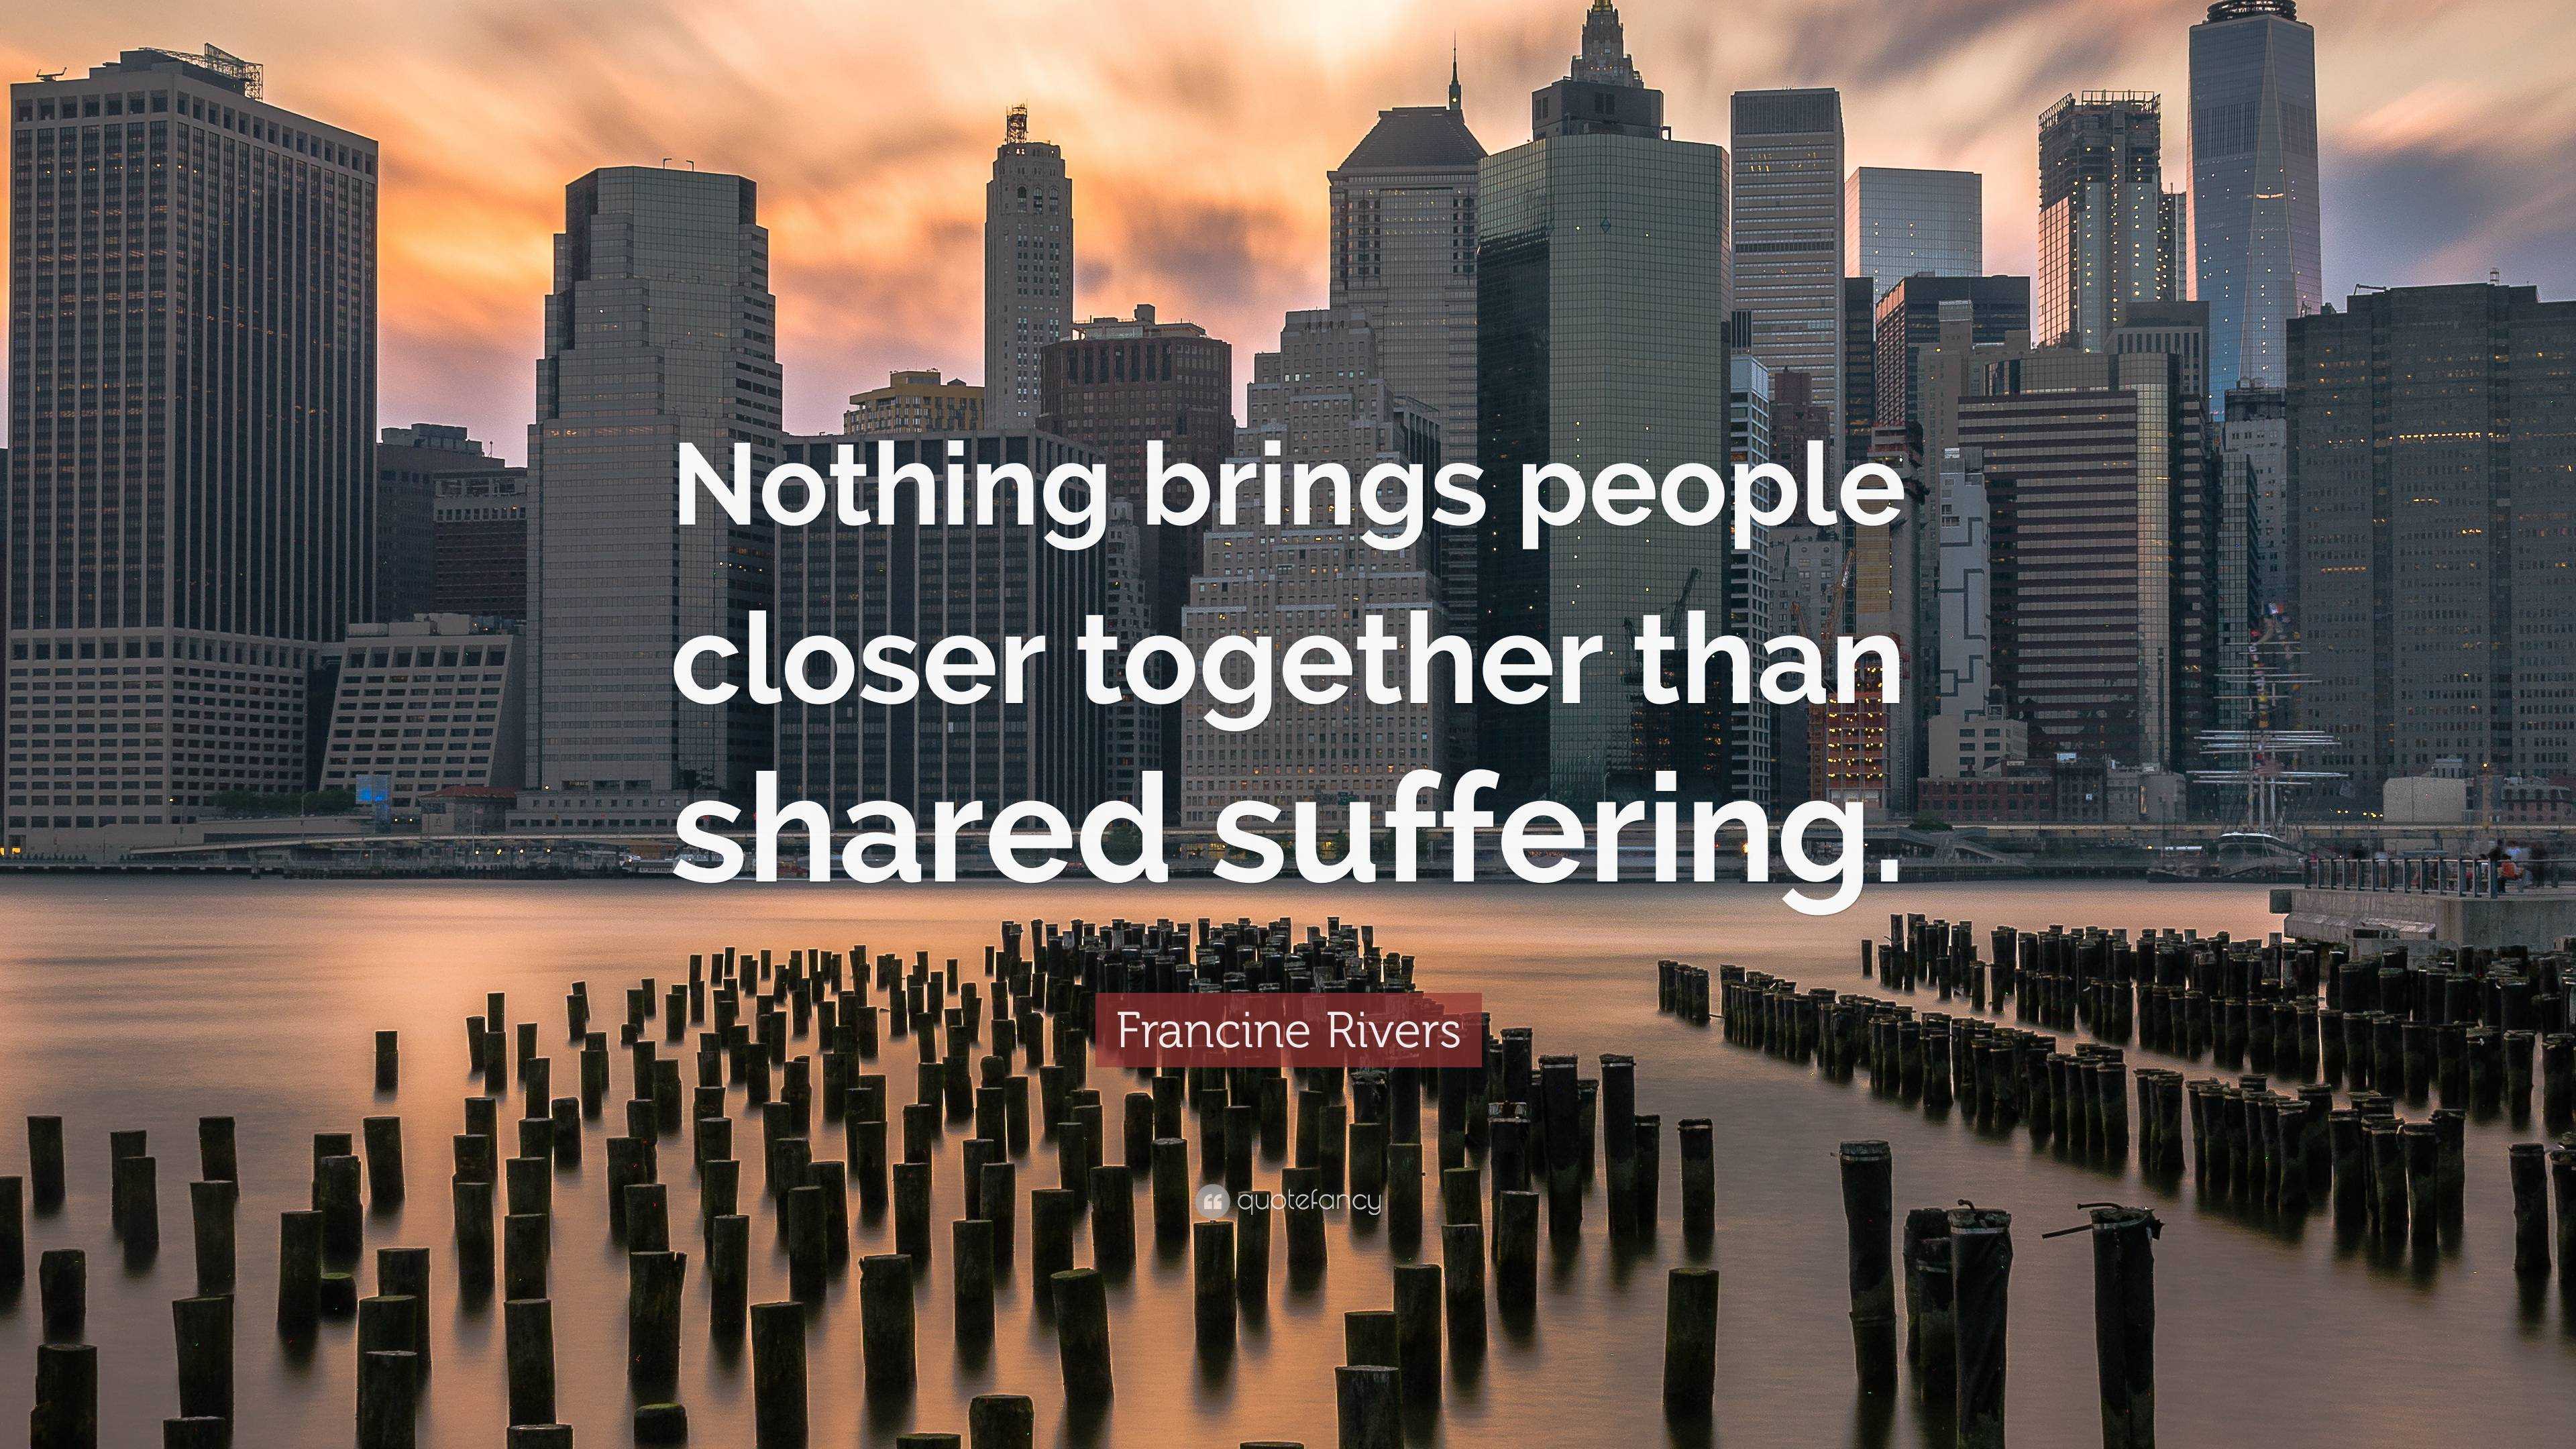 Suffering Together